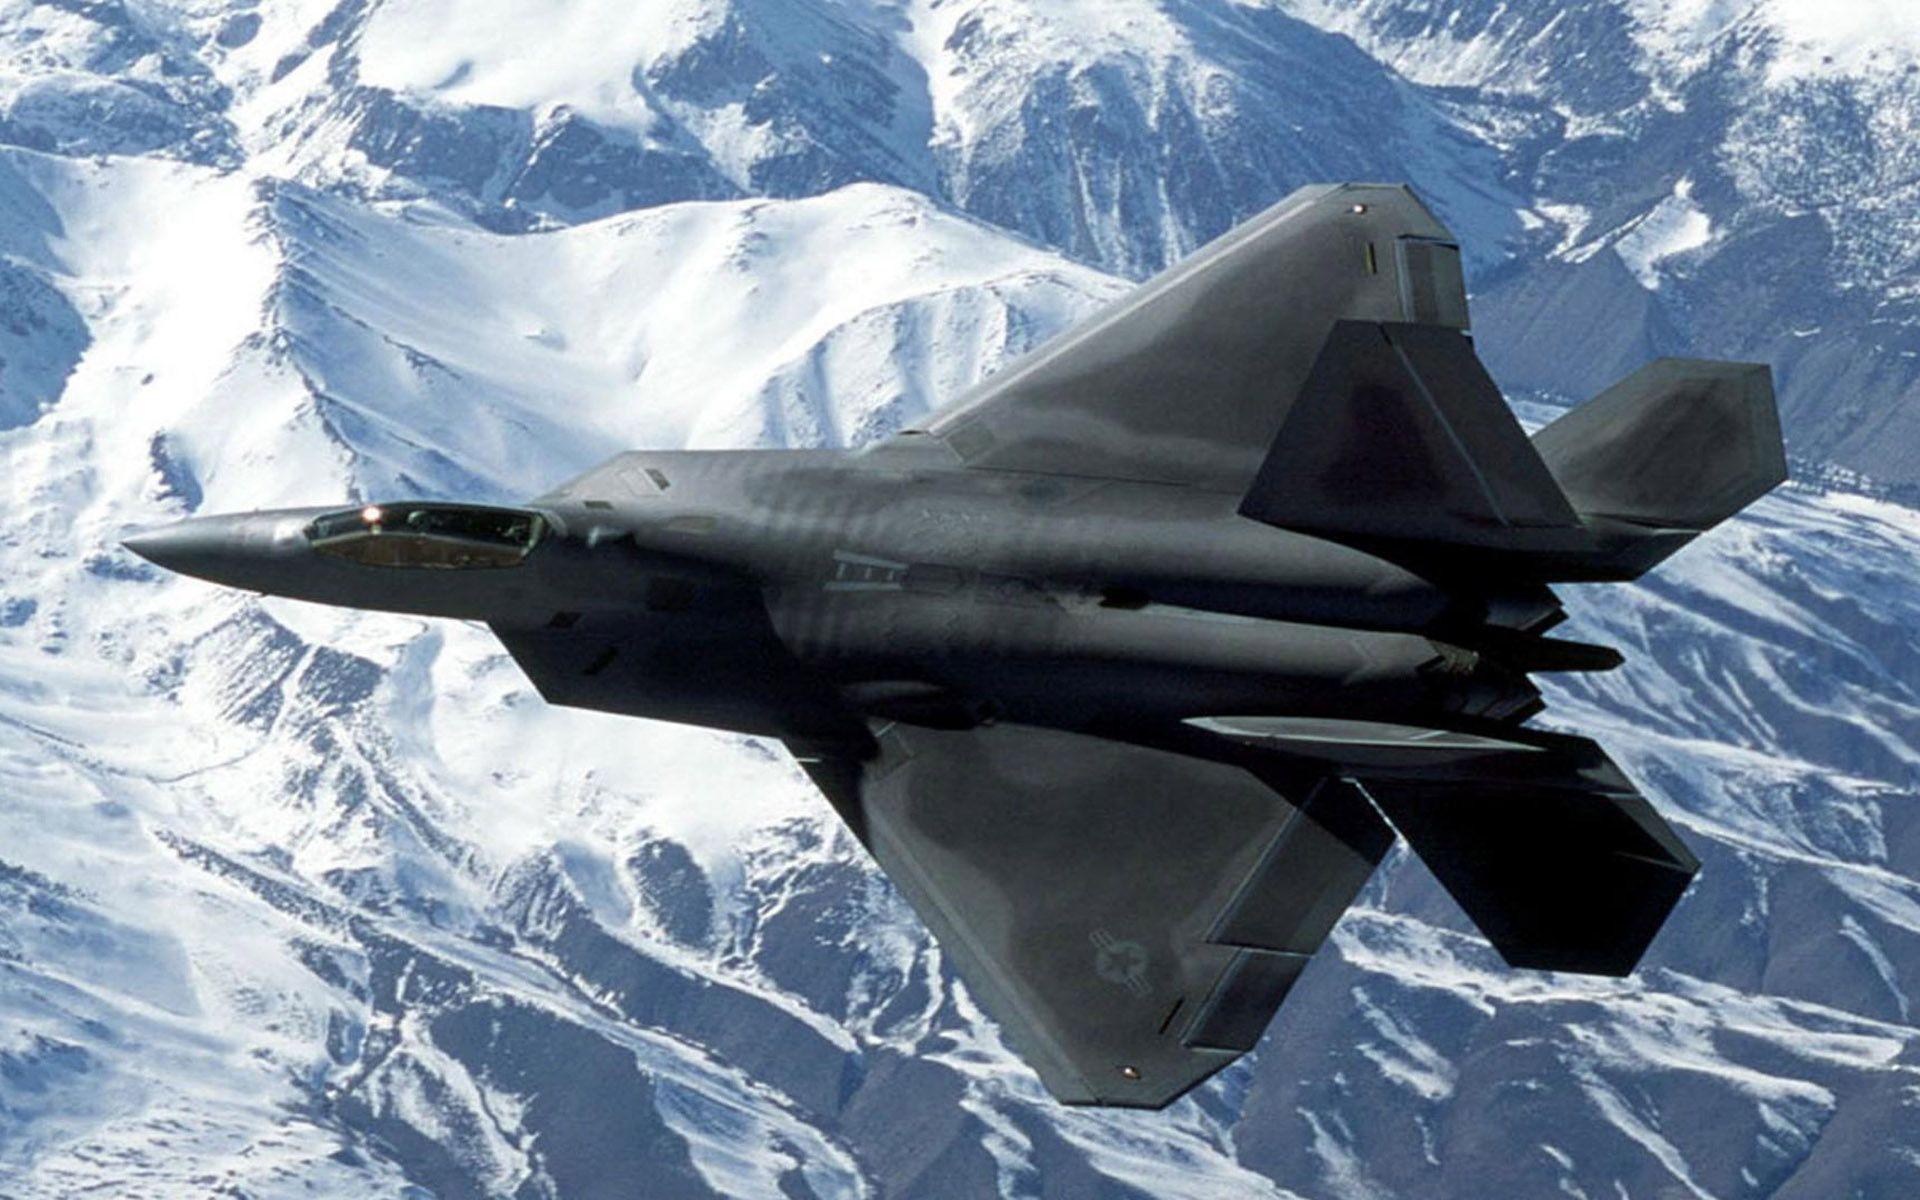 Stealth Fighter Wallpapers - Wallpaper Cave